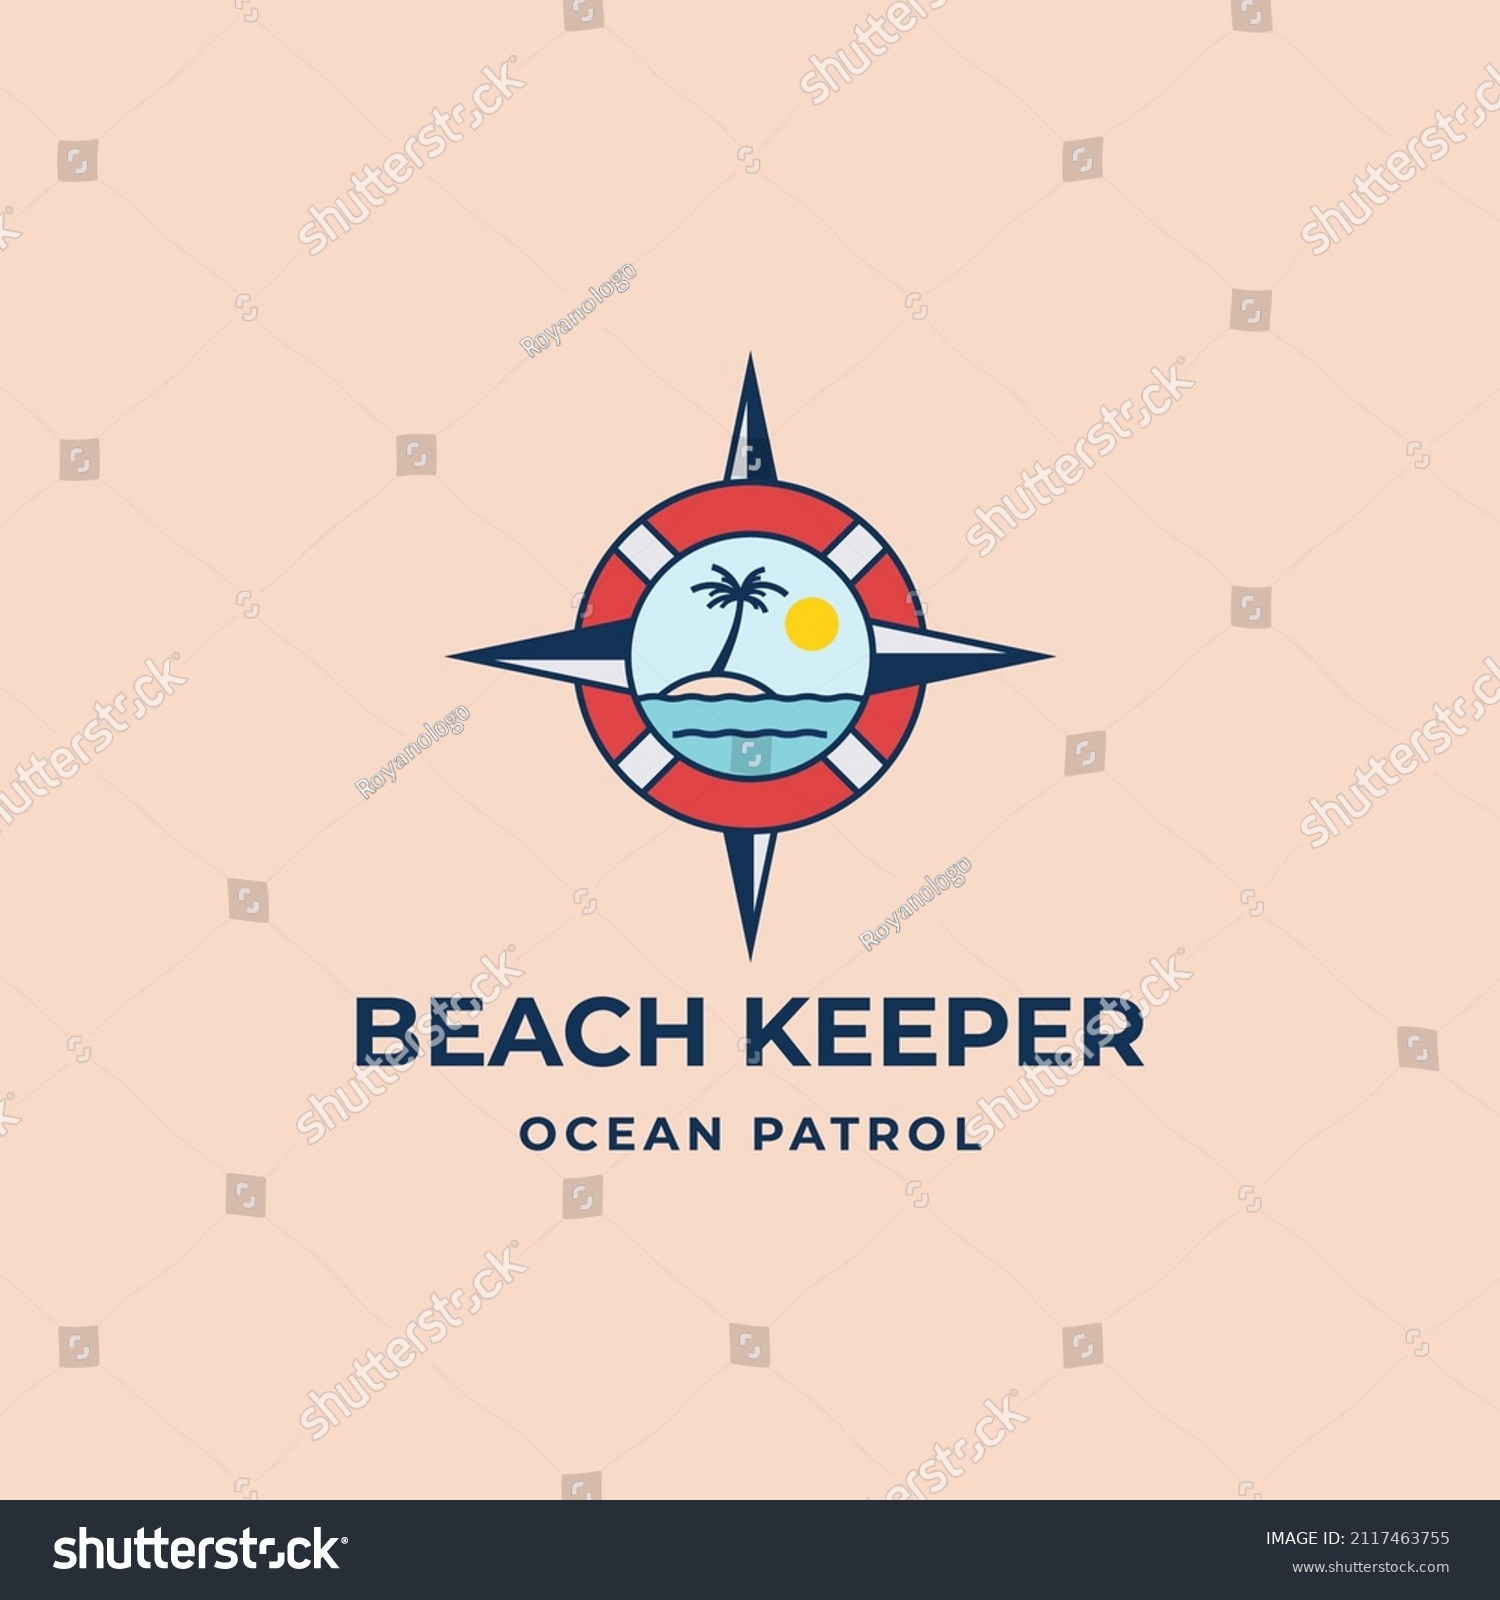 SVG of Beach with red safeguard ring and compass emblem badge vector illustration. Bay watch beach patrol logo icon sign symbol design concept svg